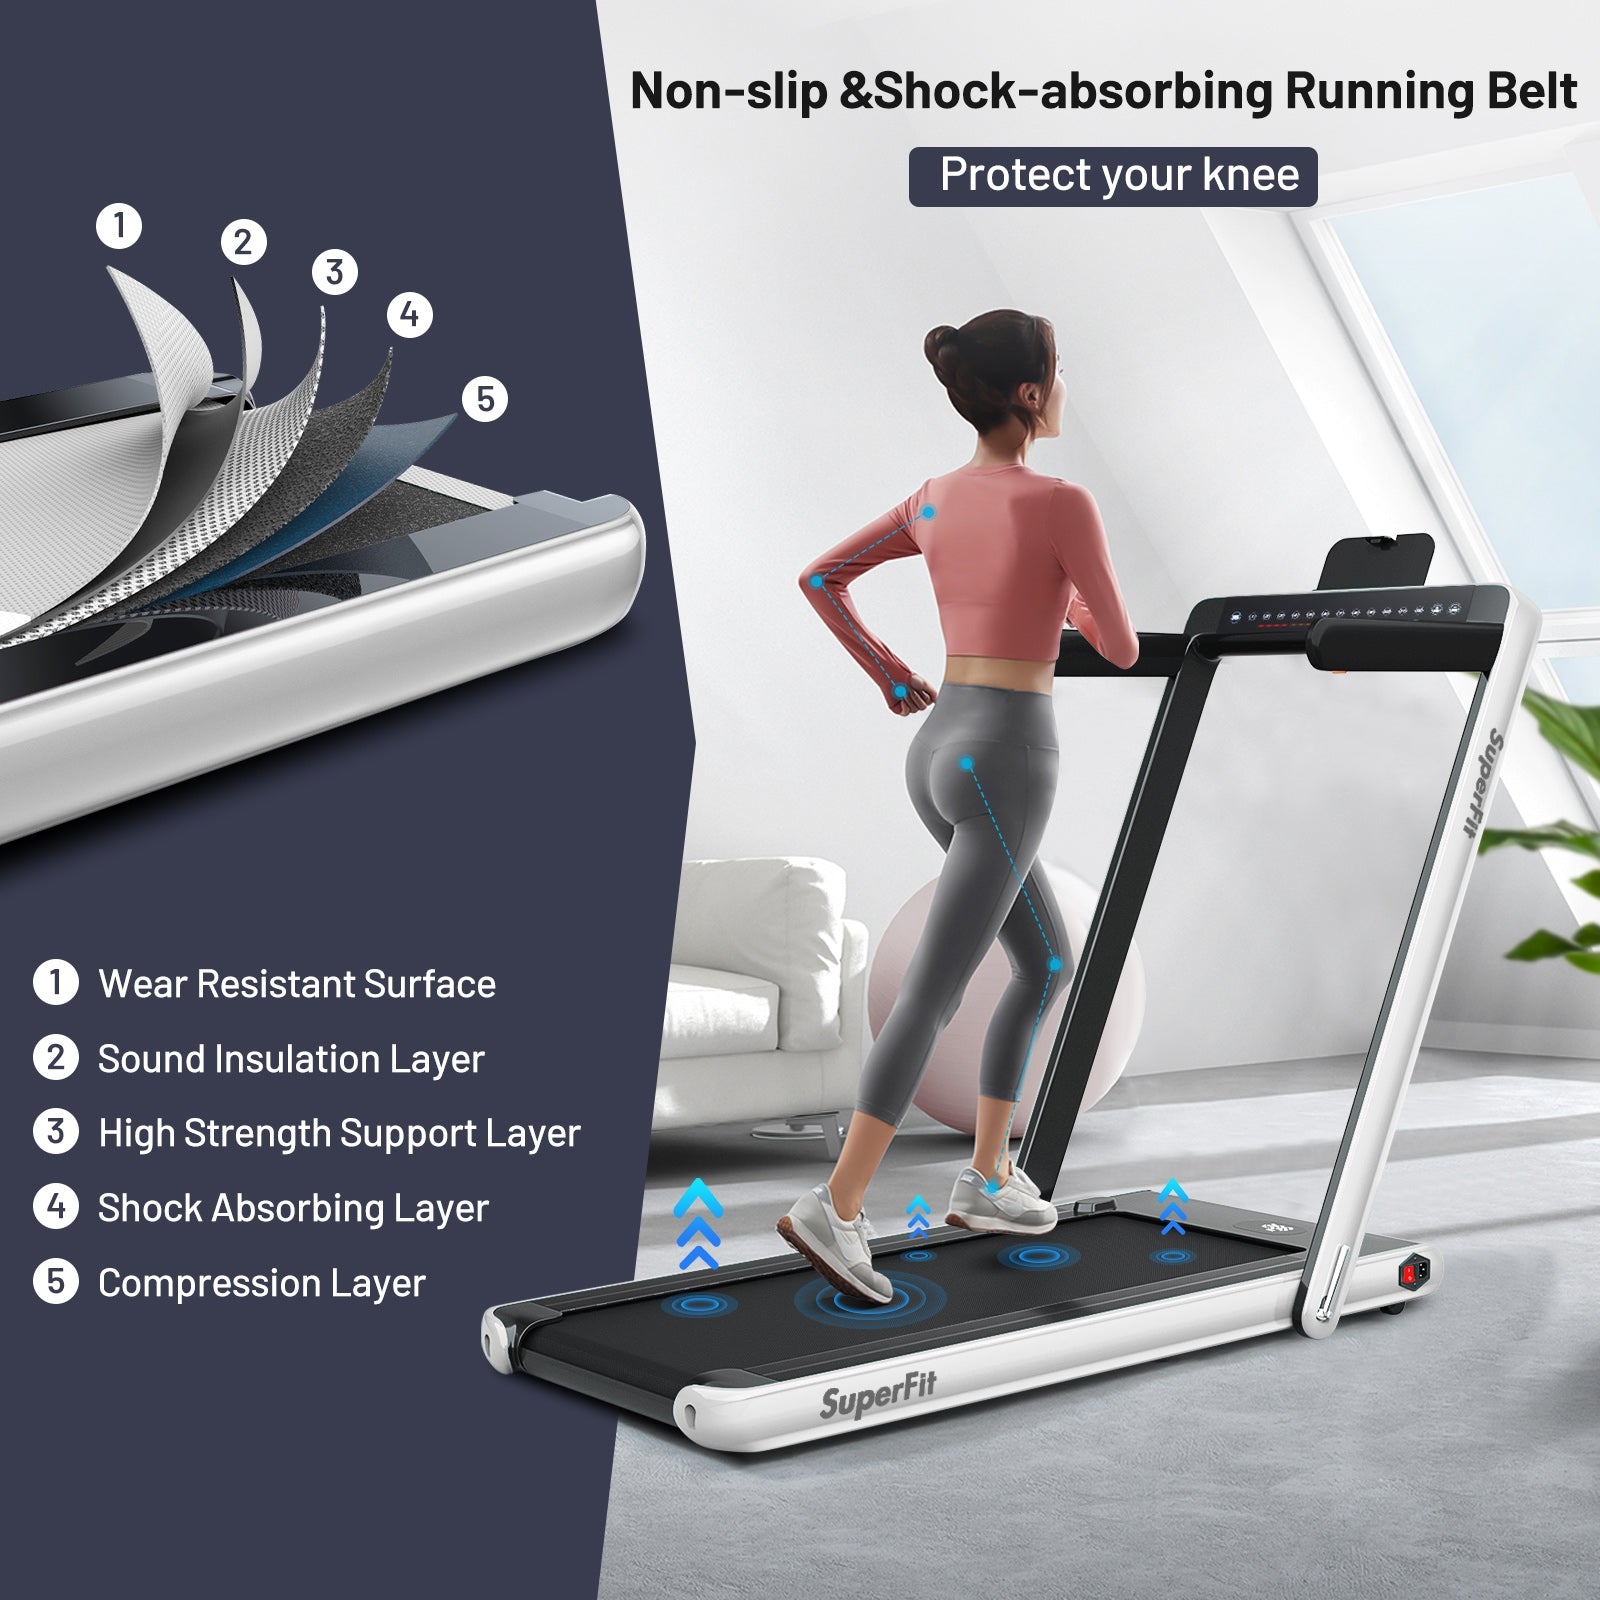 2-in-1 Foldable Walking Under Desk Treadmill with App Remote Control